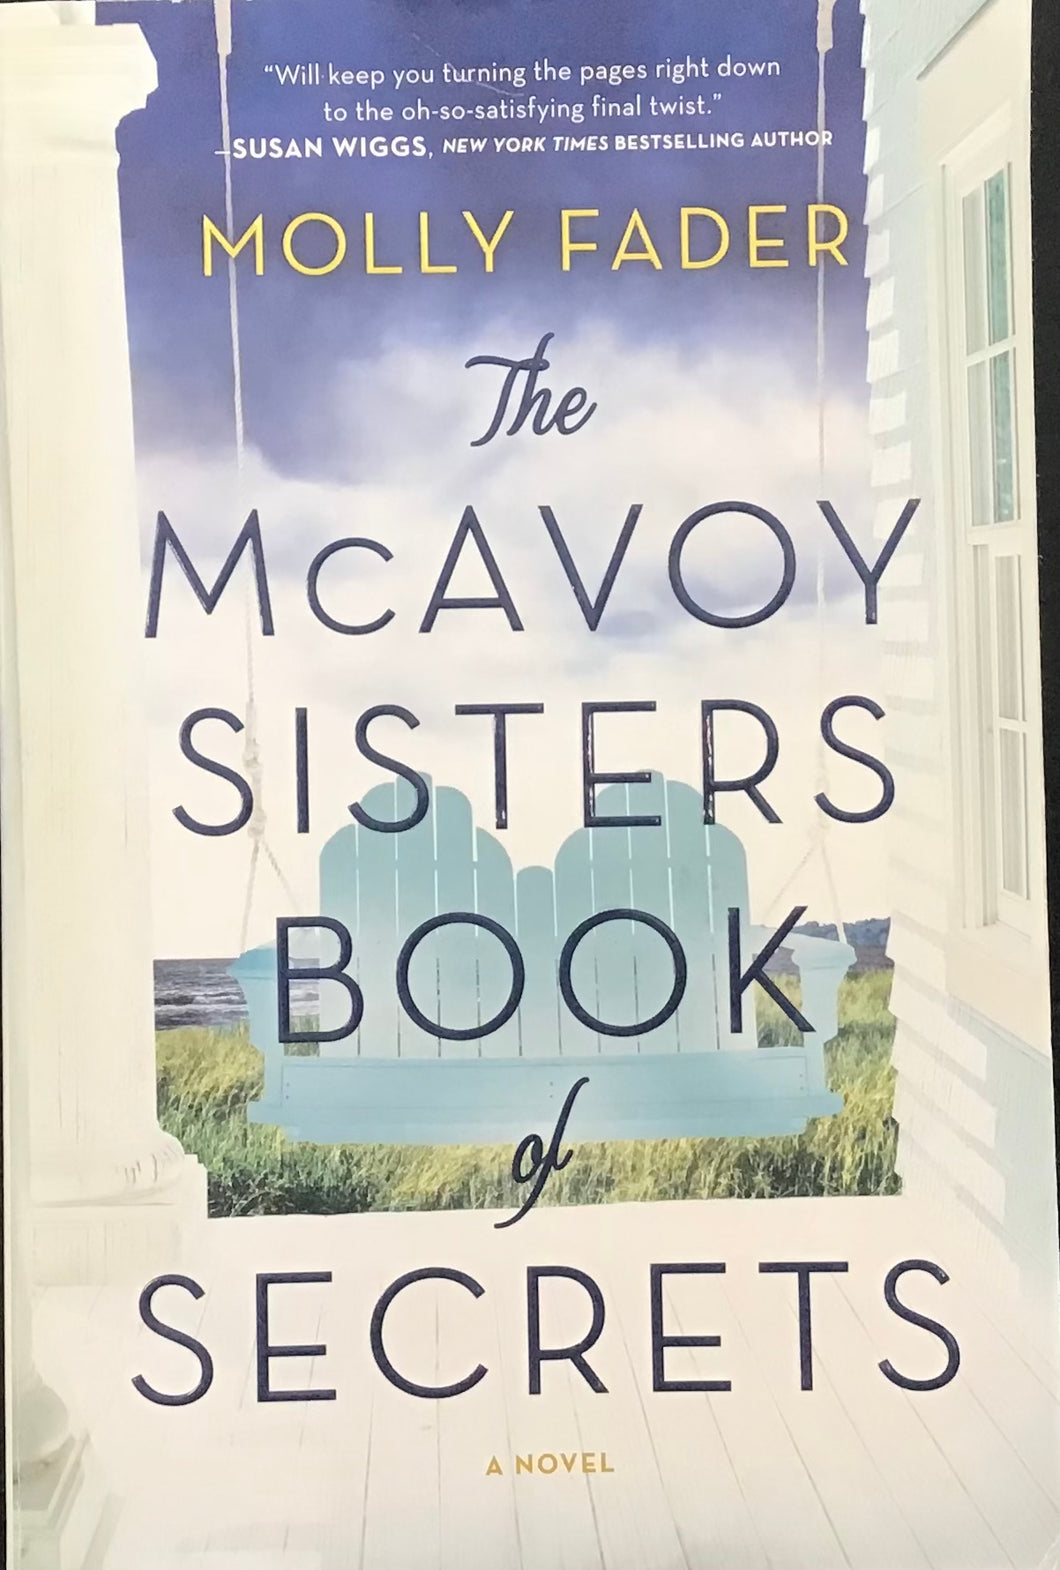 The McAvoy Sisters Book Of Secrets, Molly Fader